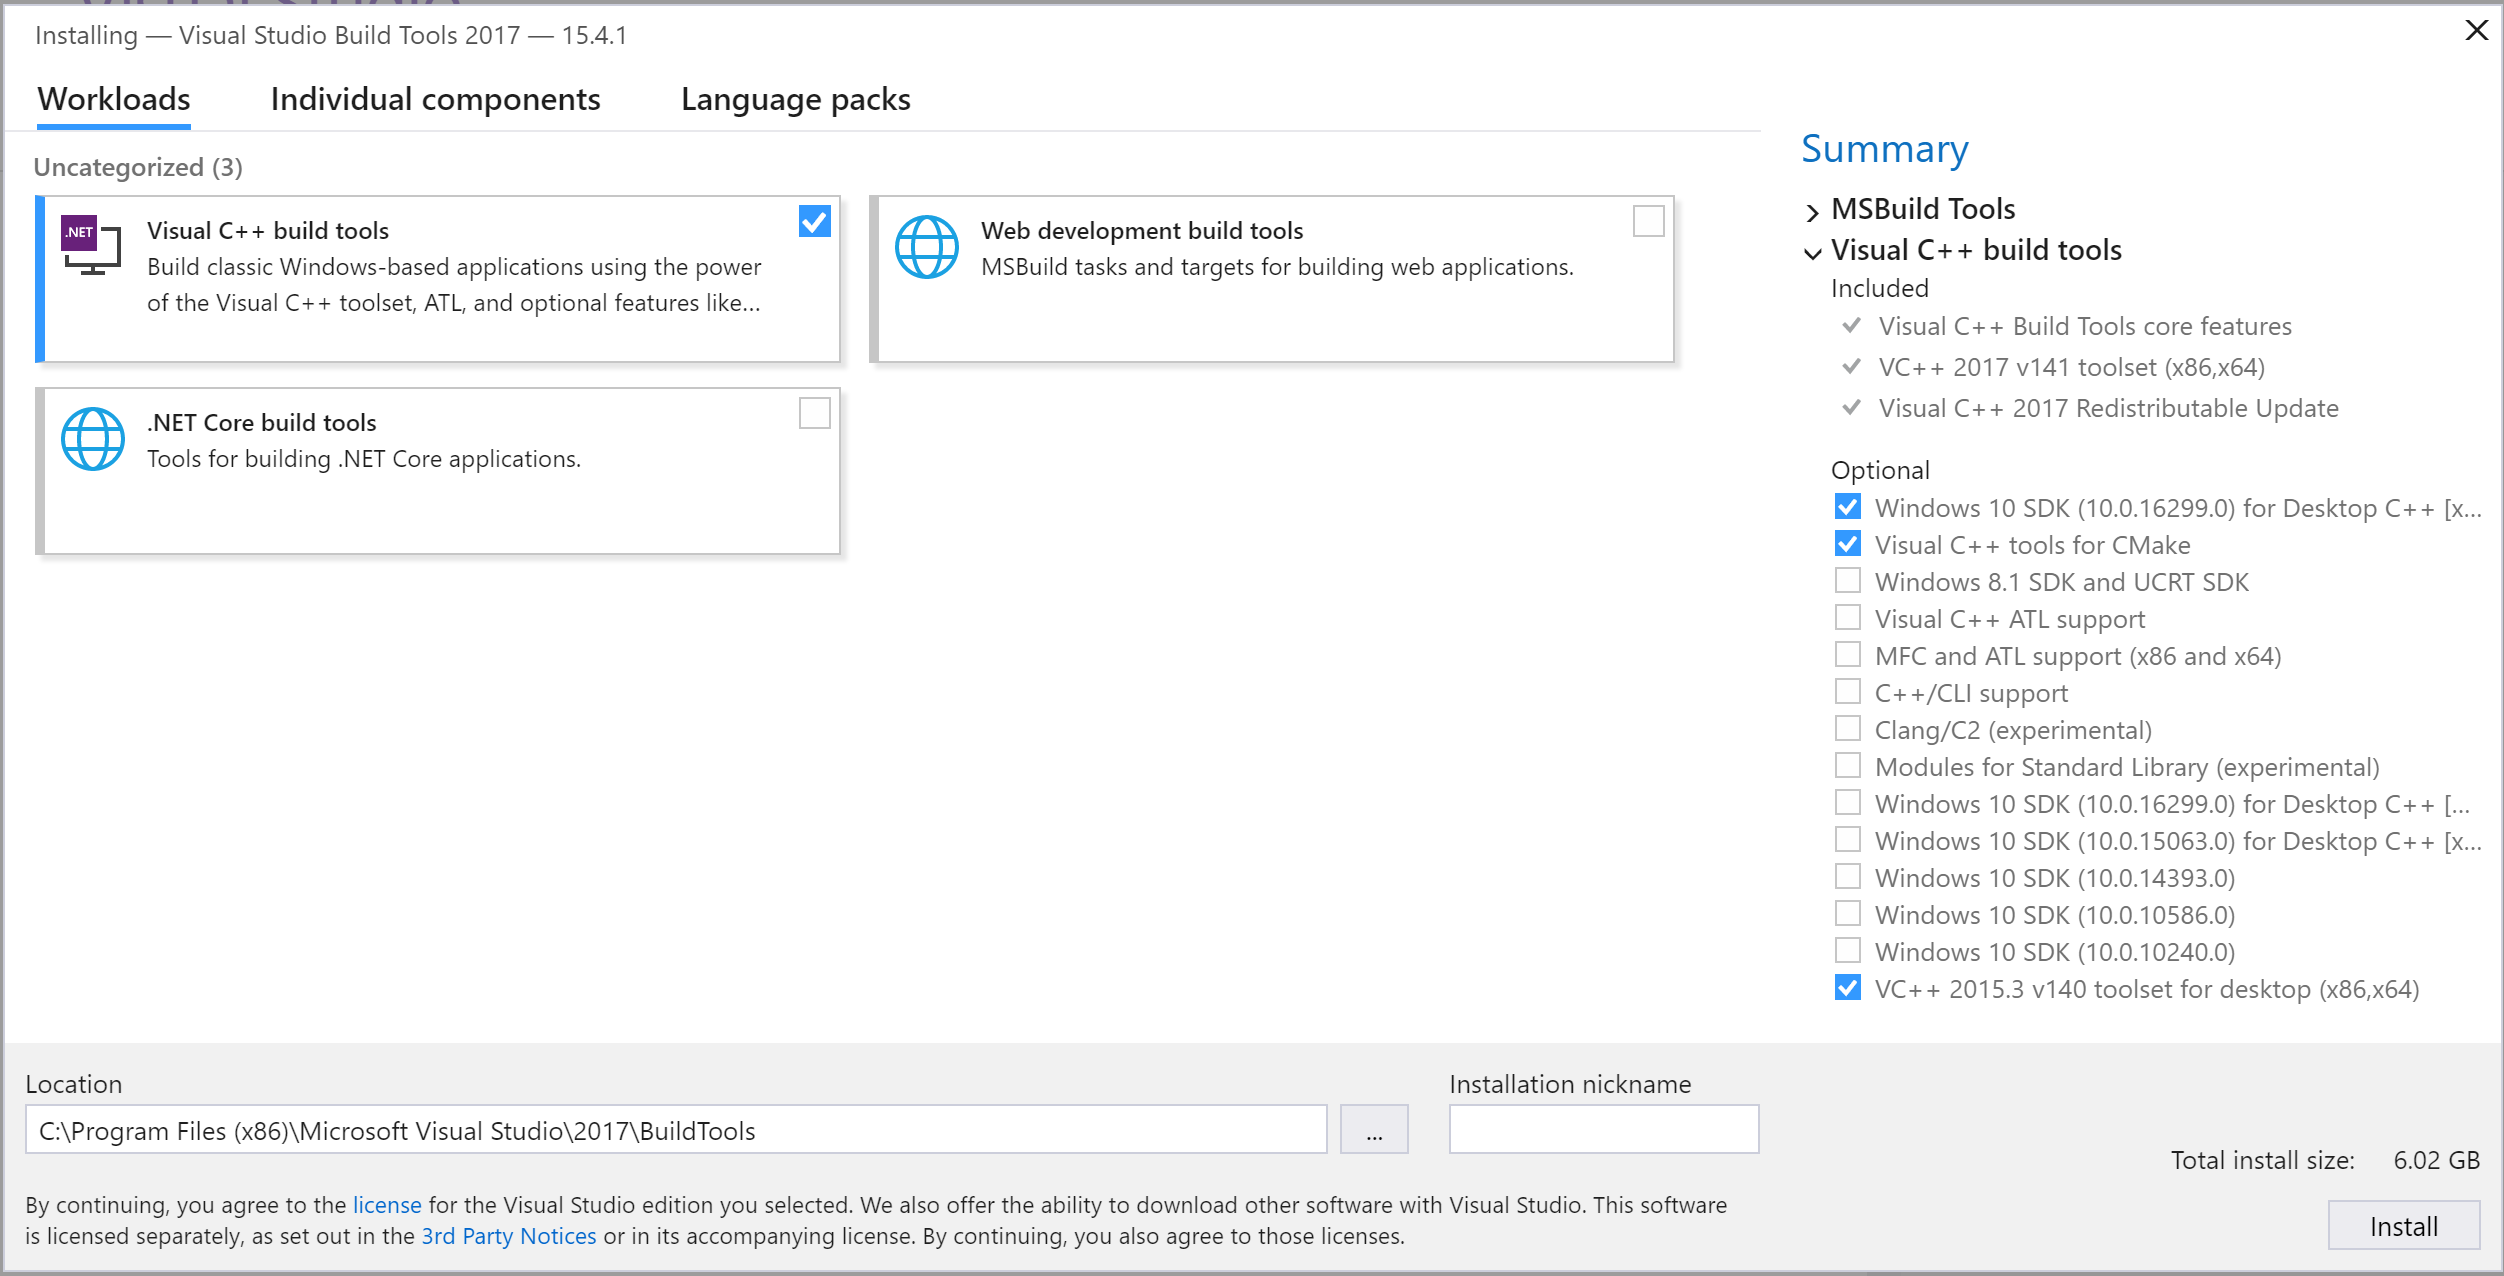 Visual Studio Build Tools Now Include The Vs2017 And Vs2015 Msvc Toolsets -  C++ Team Blog